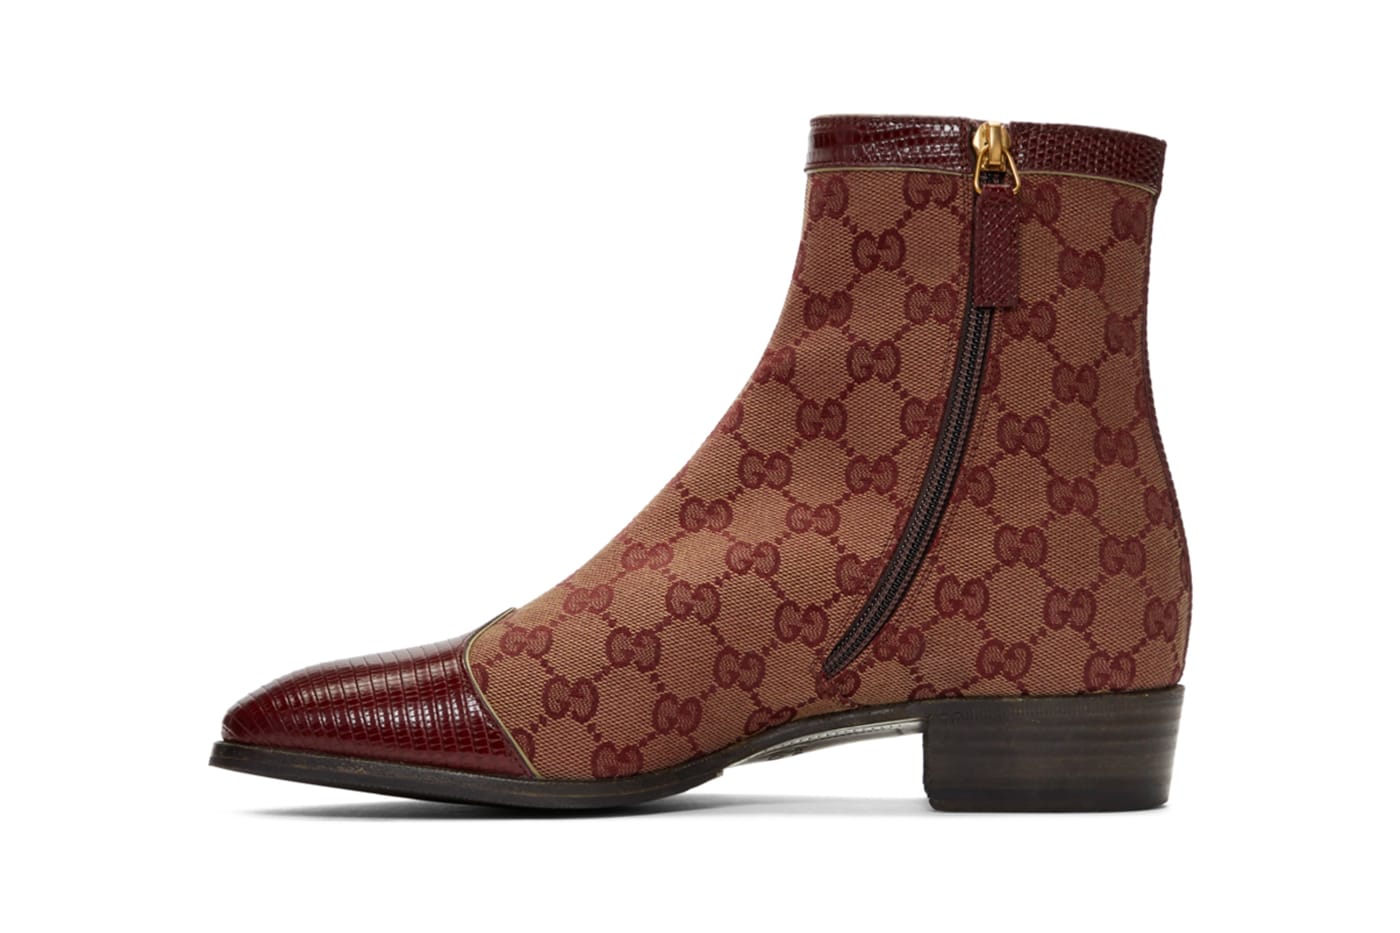 Gucci Boots 2019 Top Sellers, 60% OFF | empow-her.com